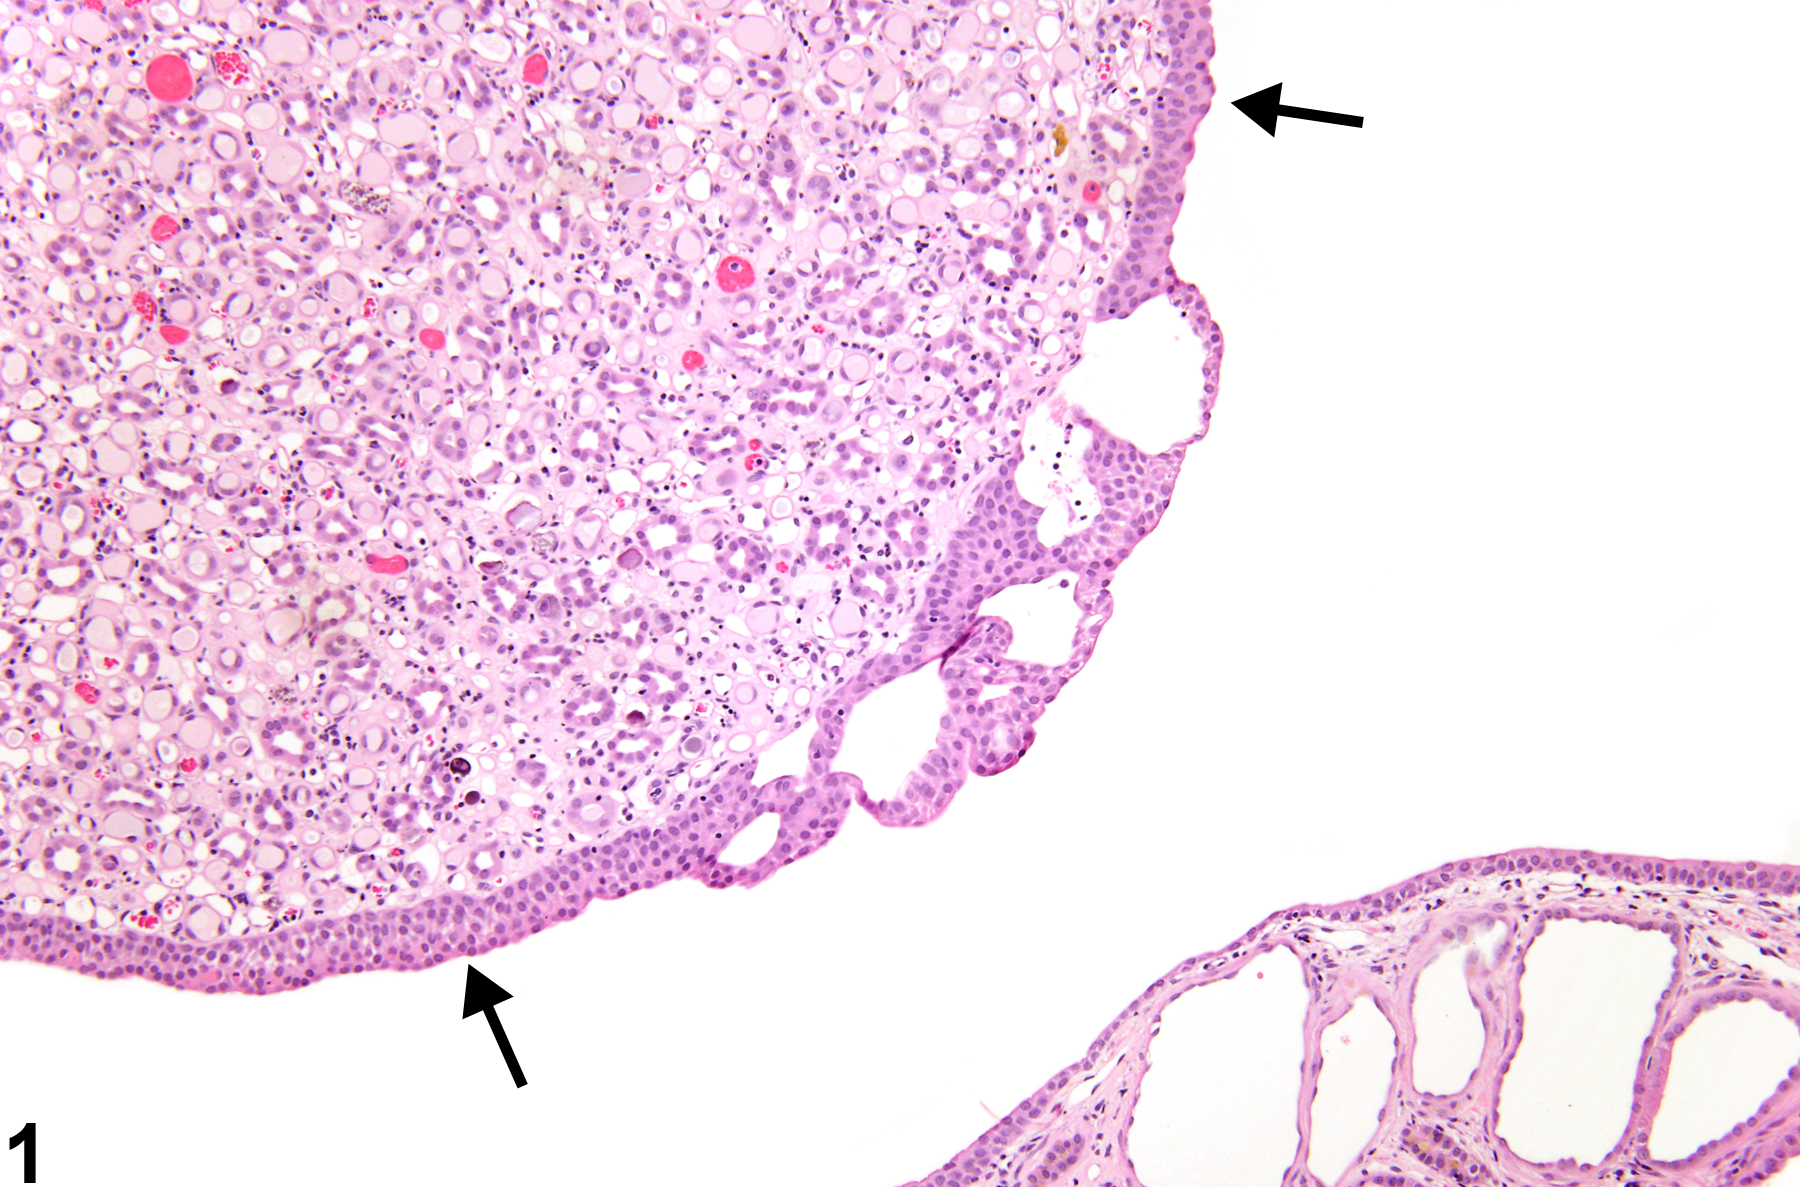 Image of papilla epithelium hyperplasia in the kidney from a male F344/N rat in a chronic study